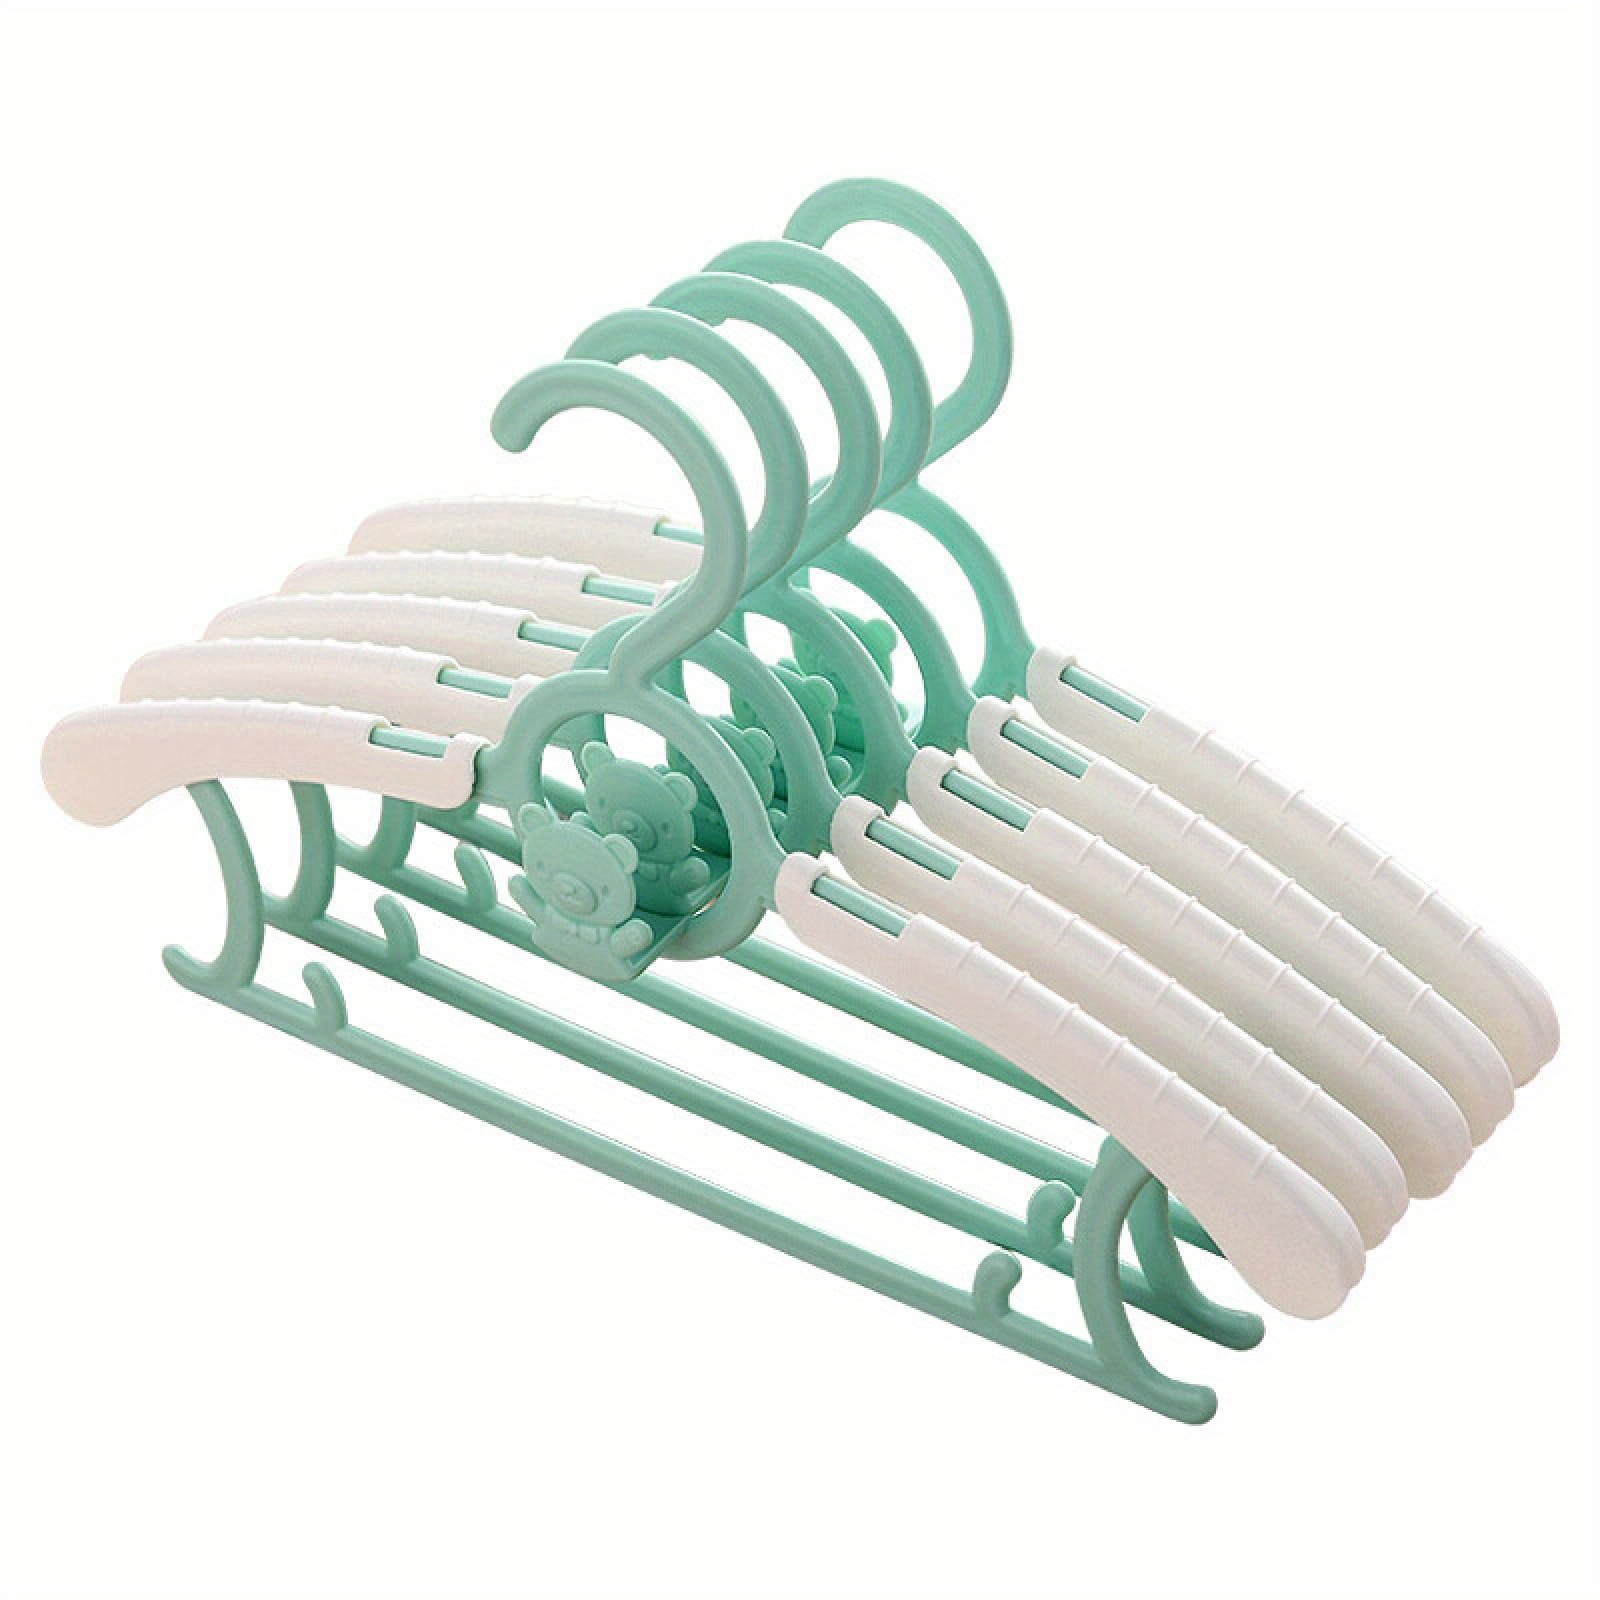 30 Pack Kids Hangers,Childrens Durable Plastic Infant Hangers for Kids Clothes,Non-Slip Baby Clothes Hangers,Extensible Toddler Hangers for Laundry